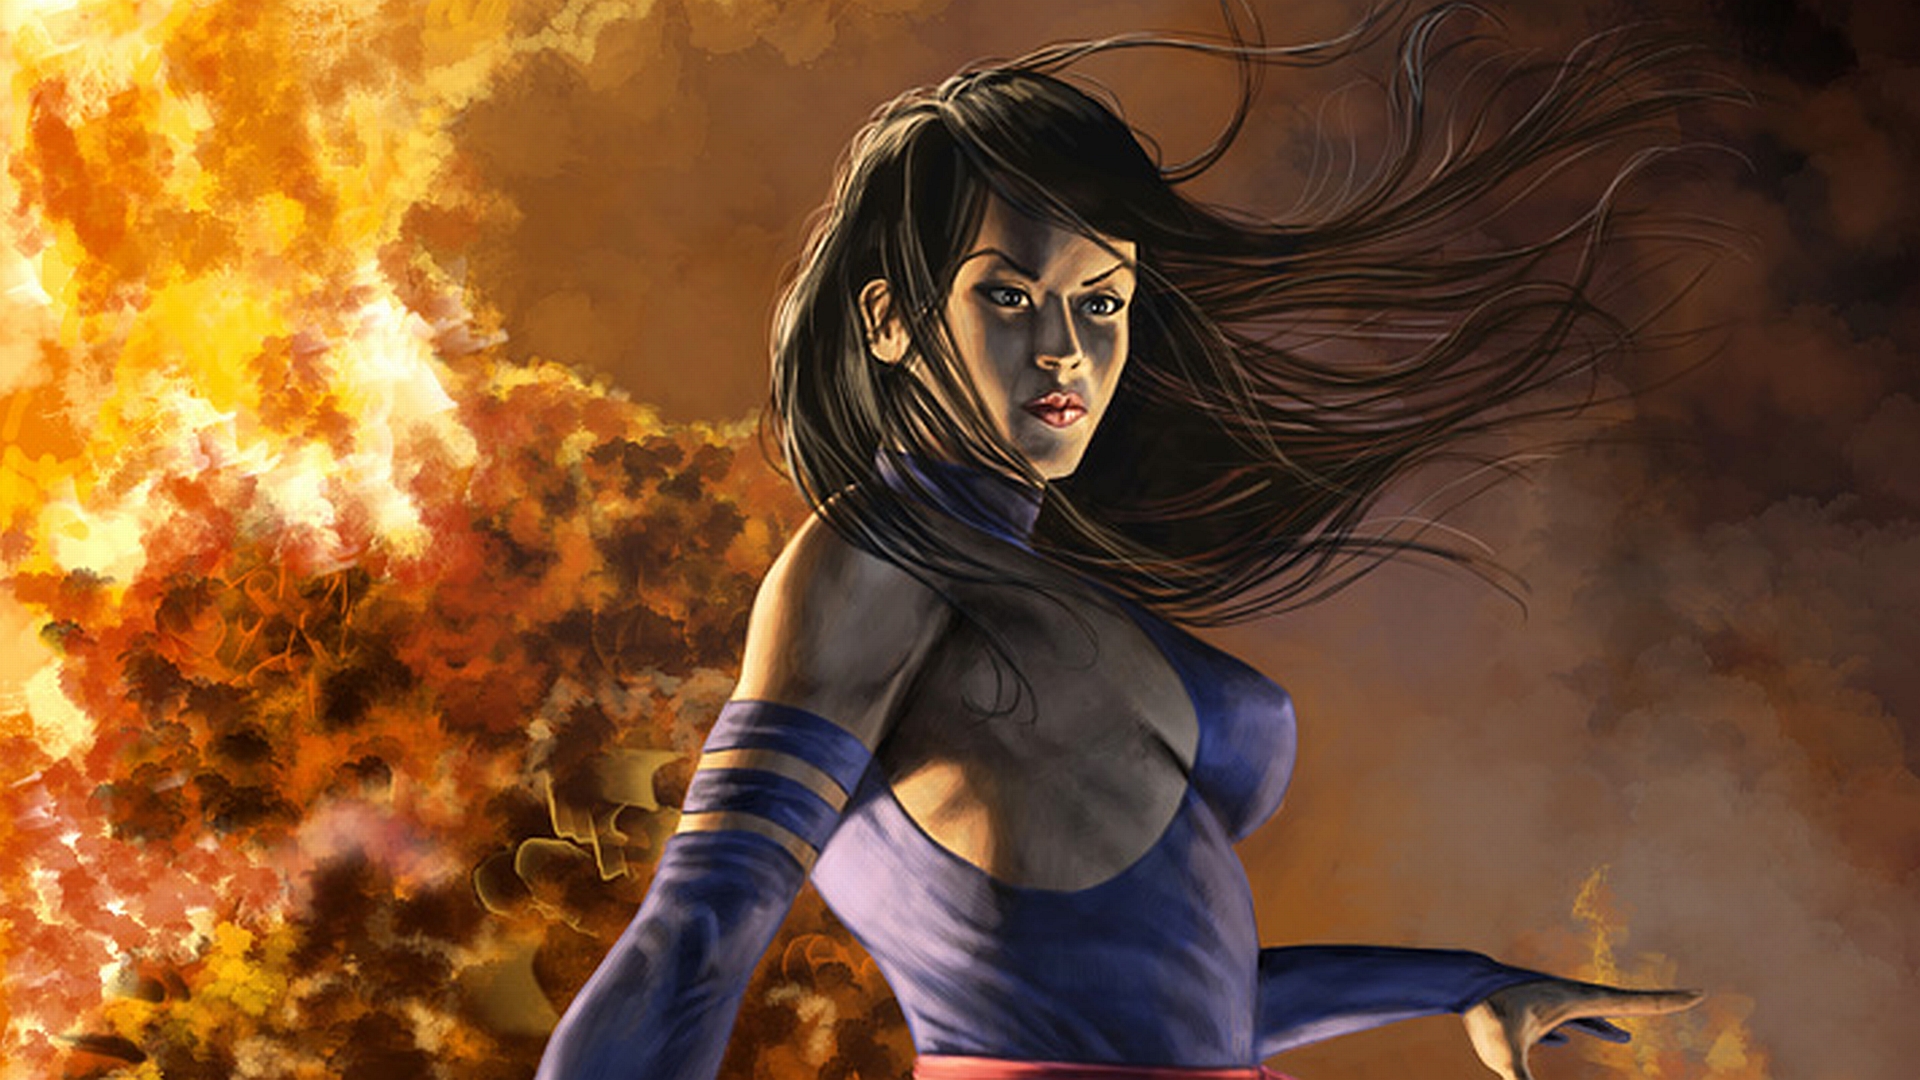 Psylocke character from the Comics in a dynamic pose.